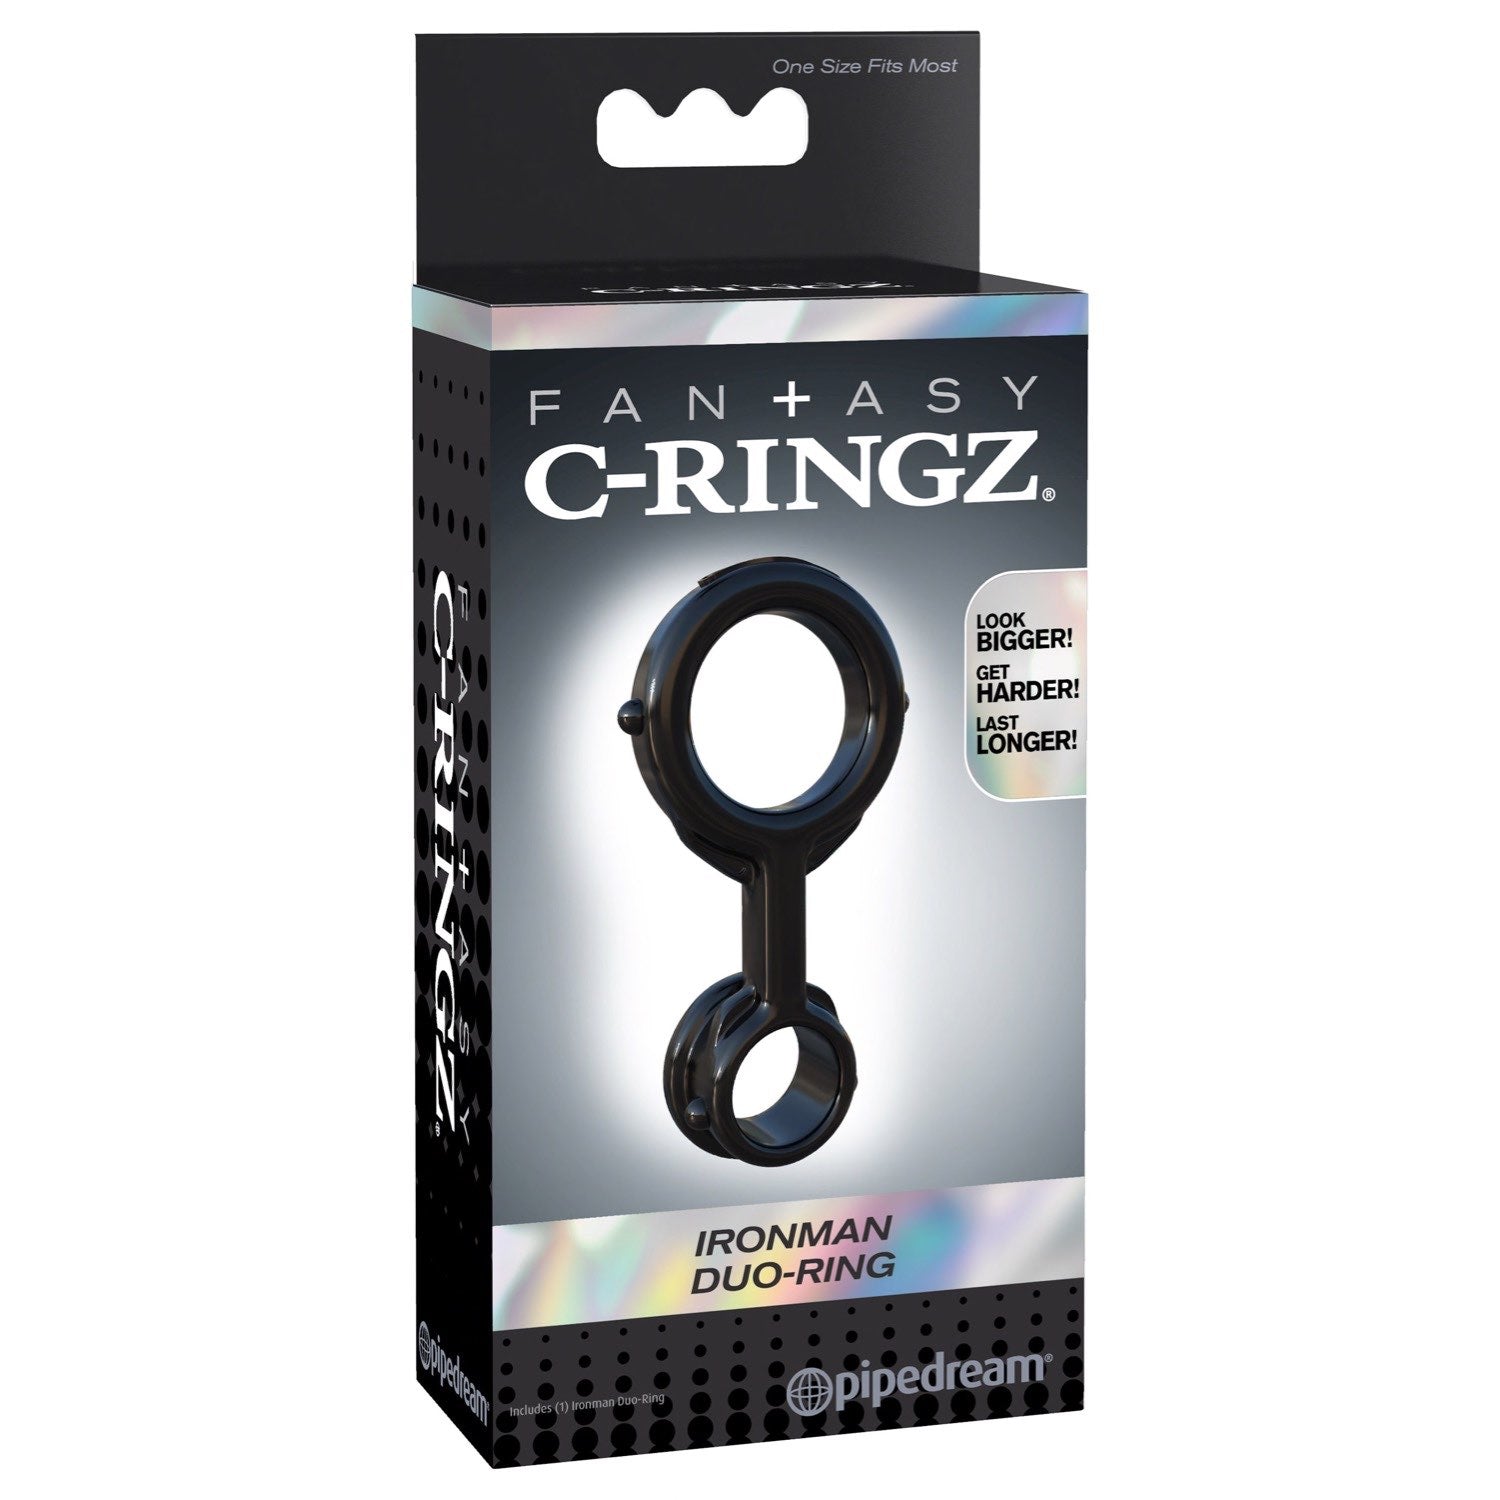 Fantasy C-Ringz Fantasy C-ringz Ironman Duo Ring - Black Cock &amp; Ball Rings by Pipedream